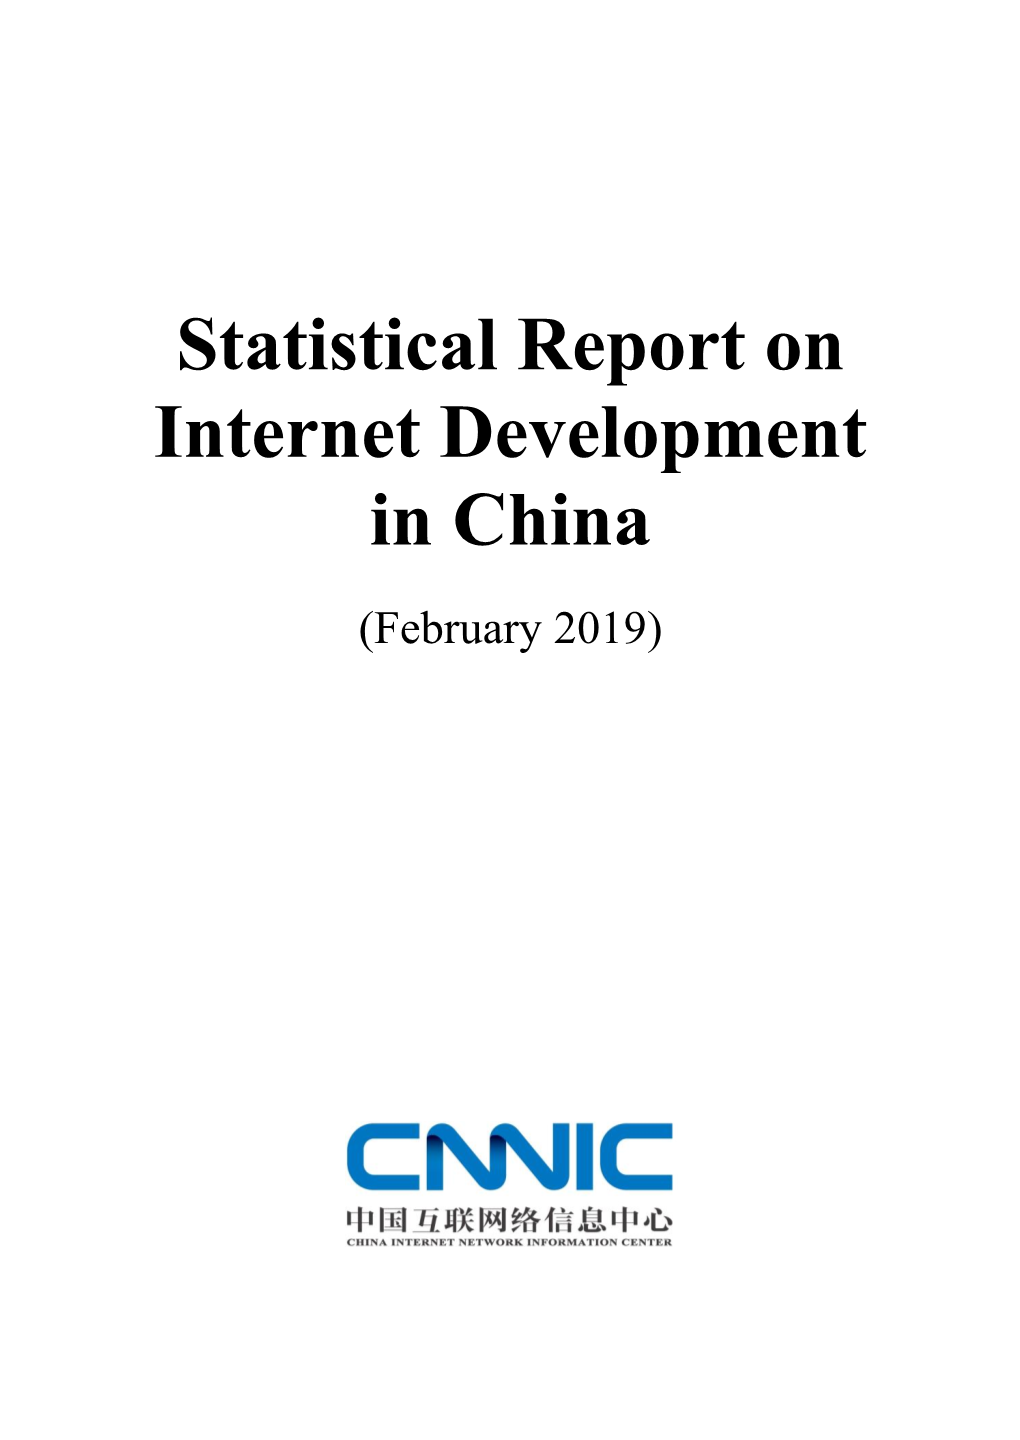 Statistical Report on Internet Development in China